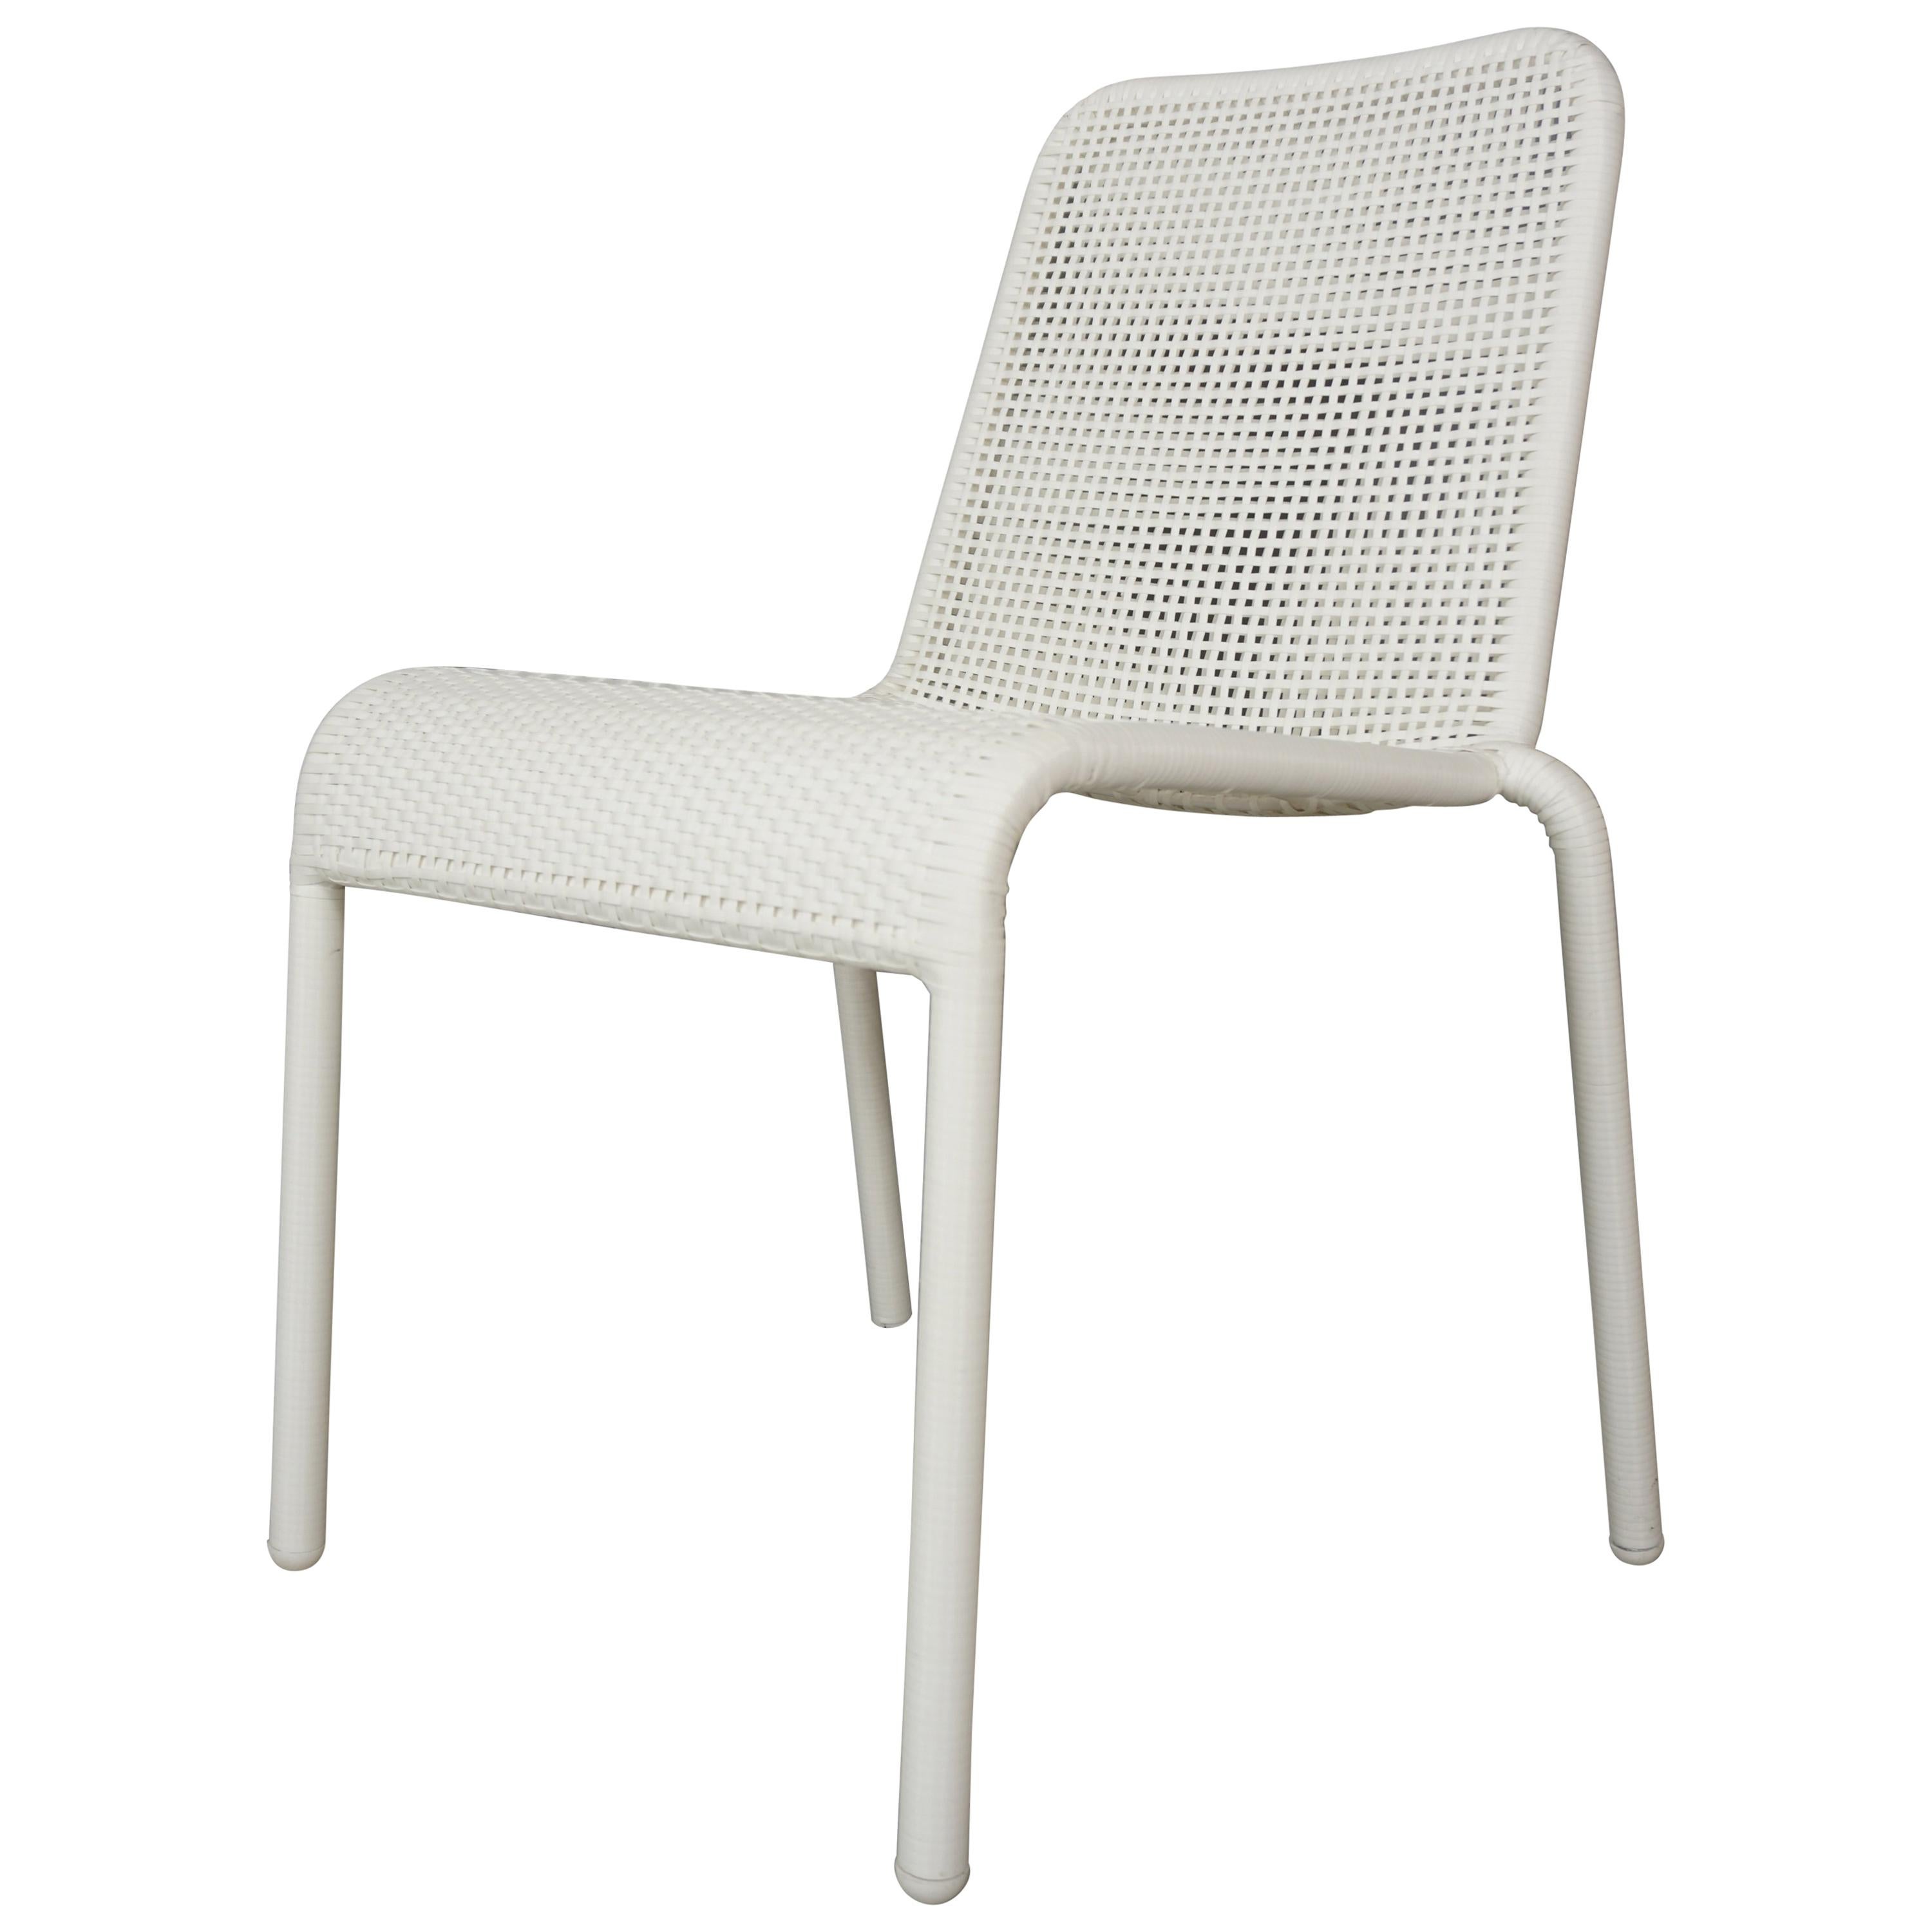 French Design White Braided Resin Chair